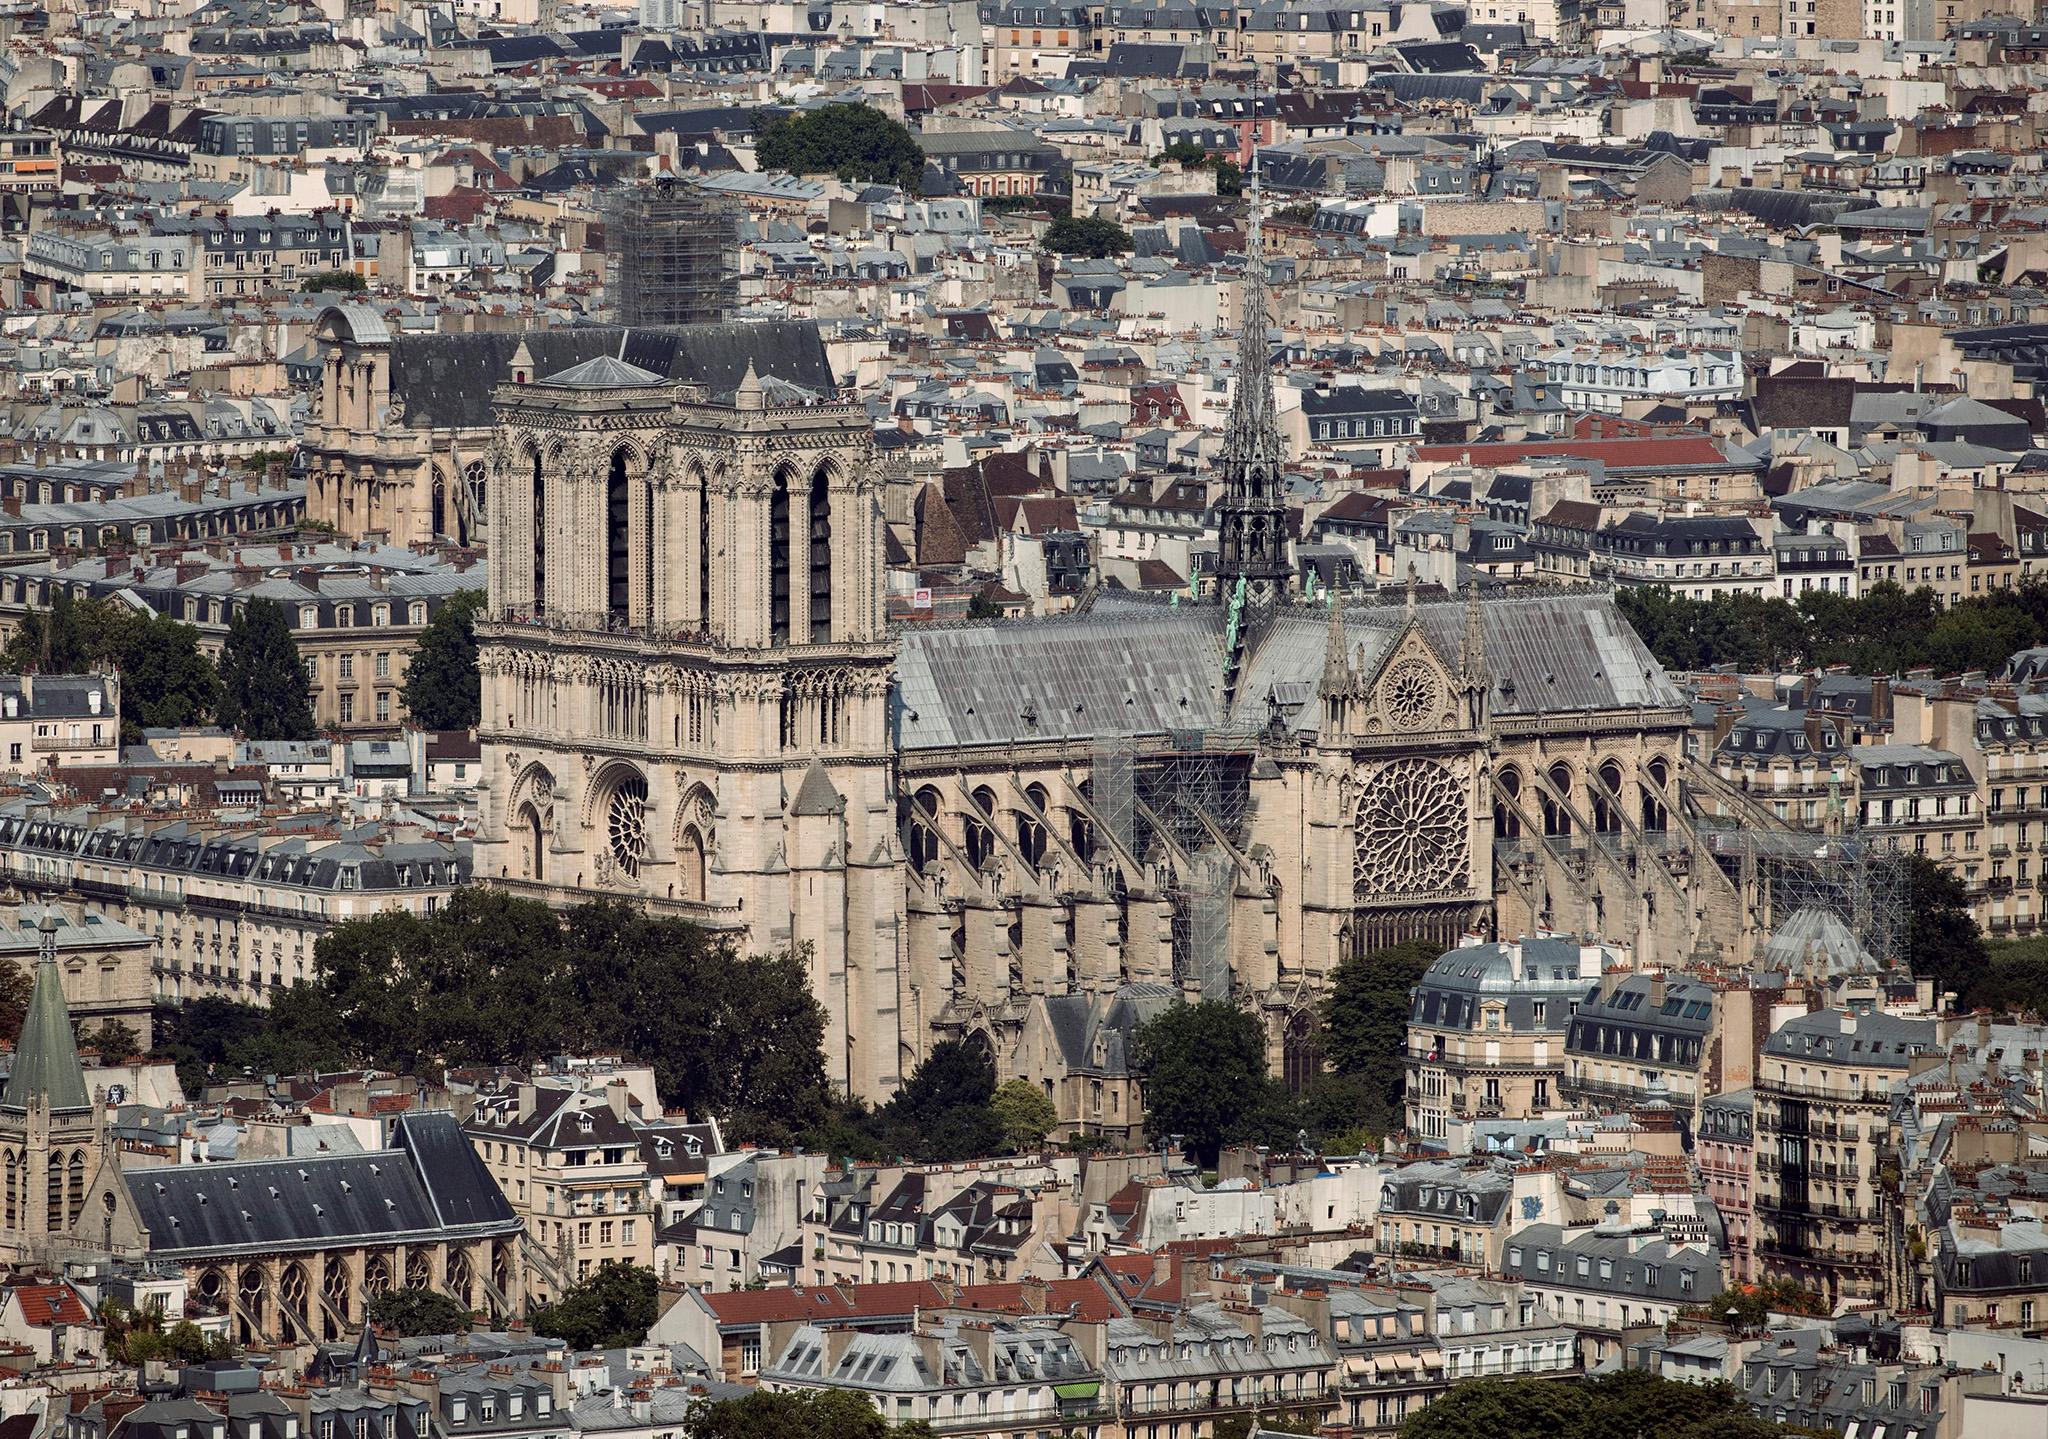 Notre Dame Fire Before And After Photos Show Extent Of